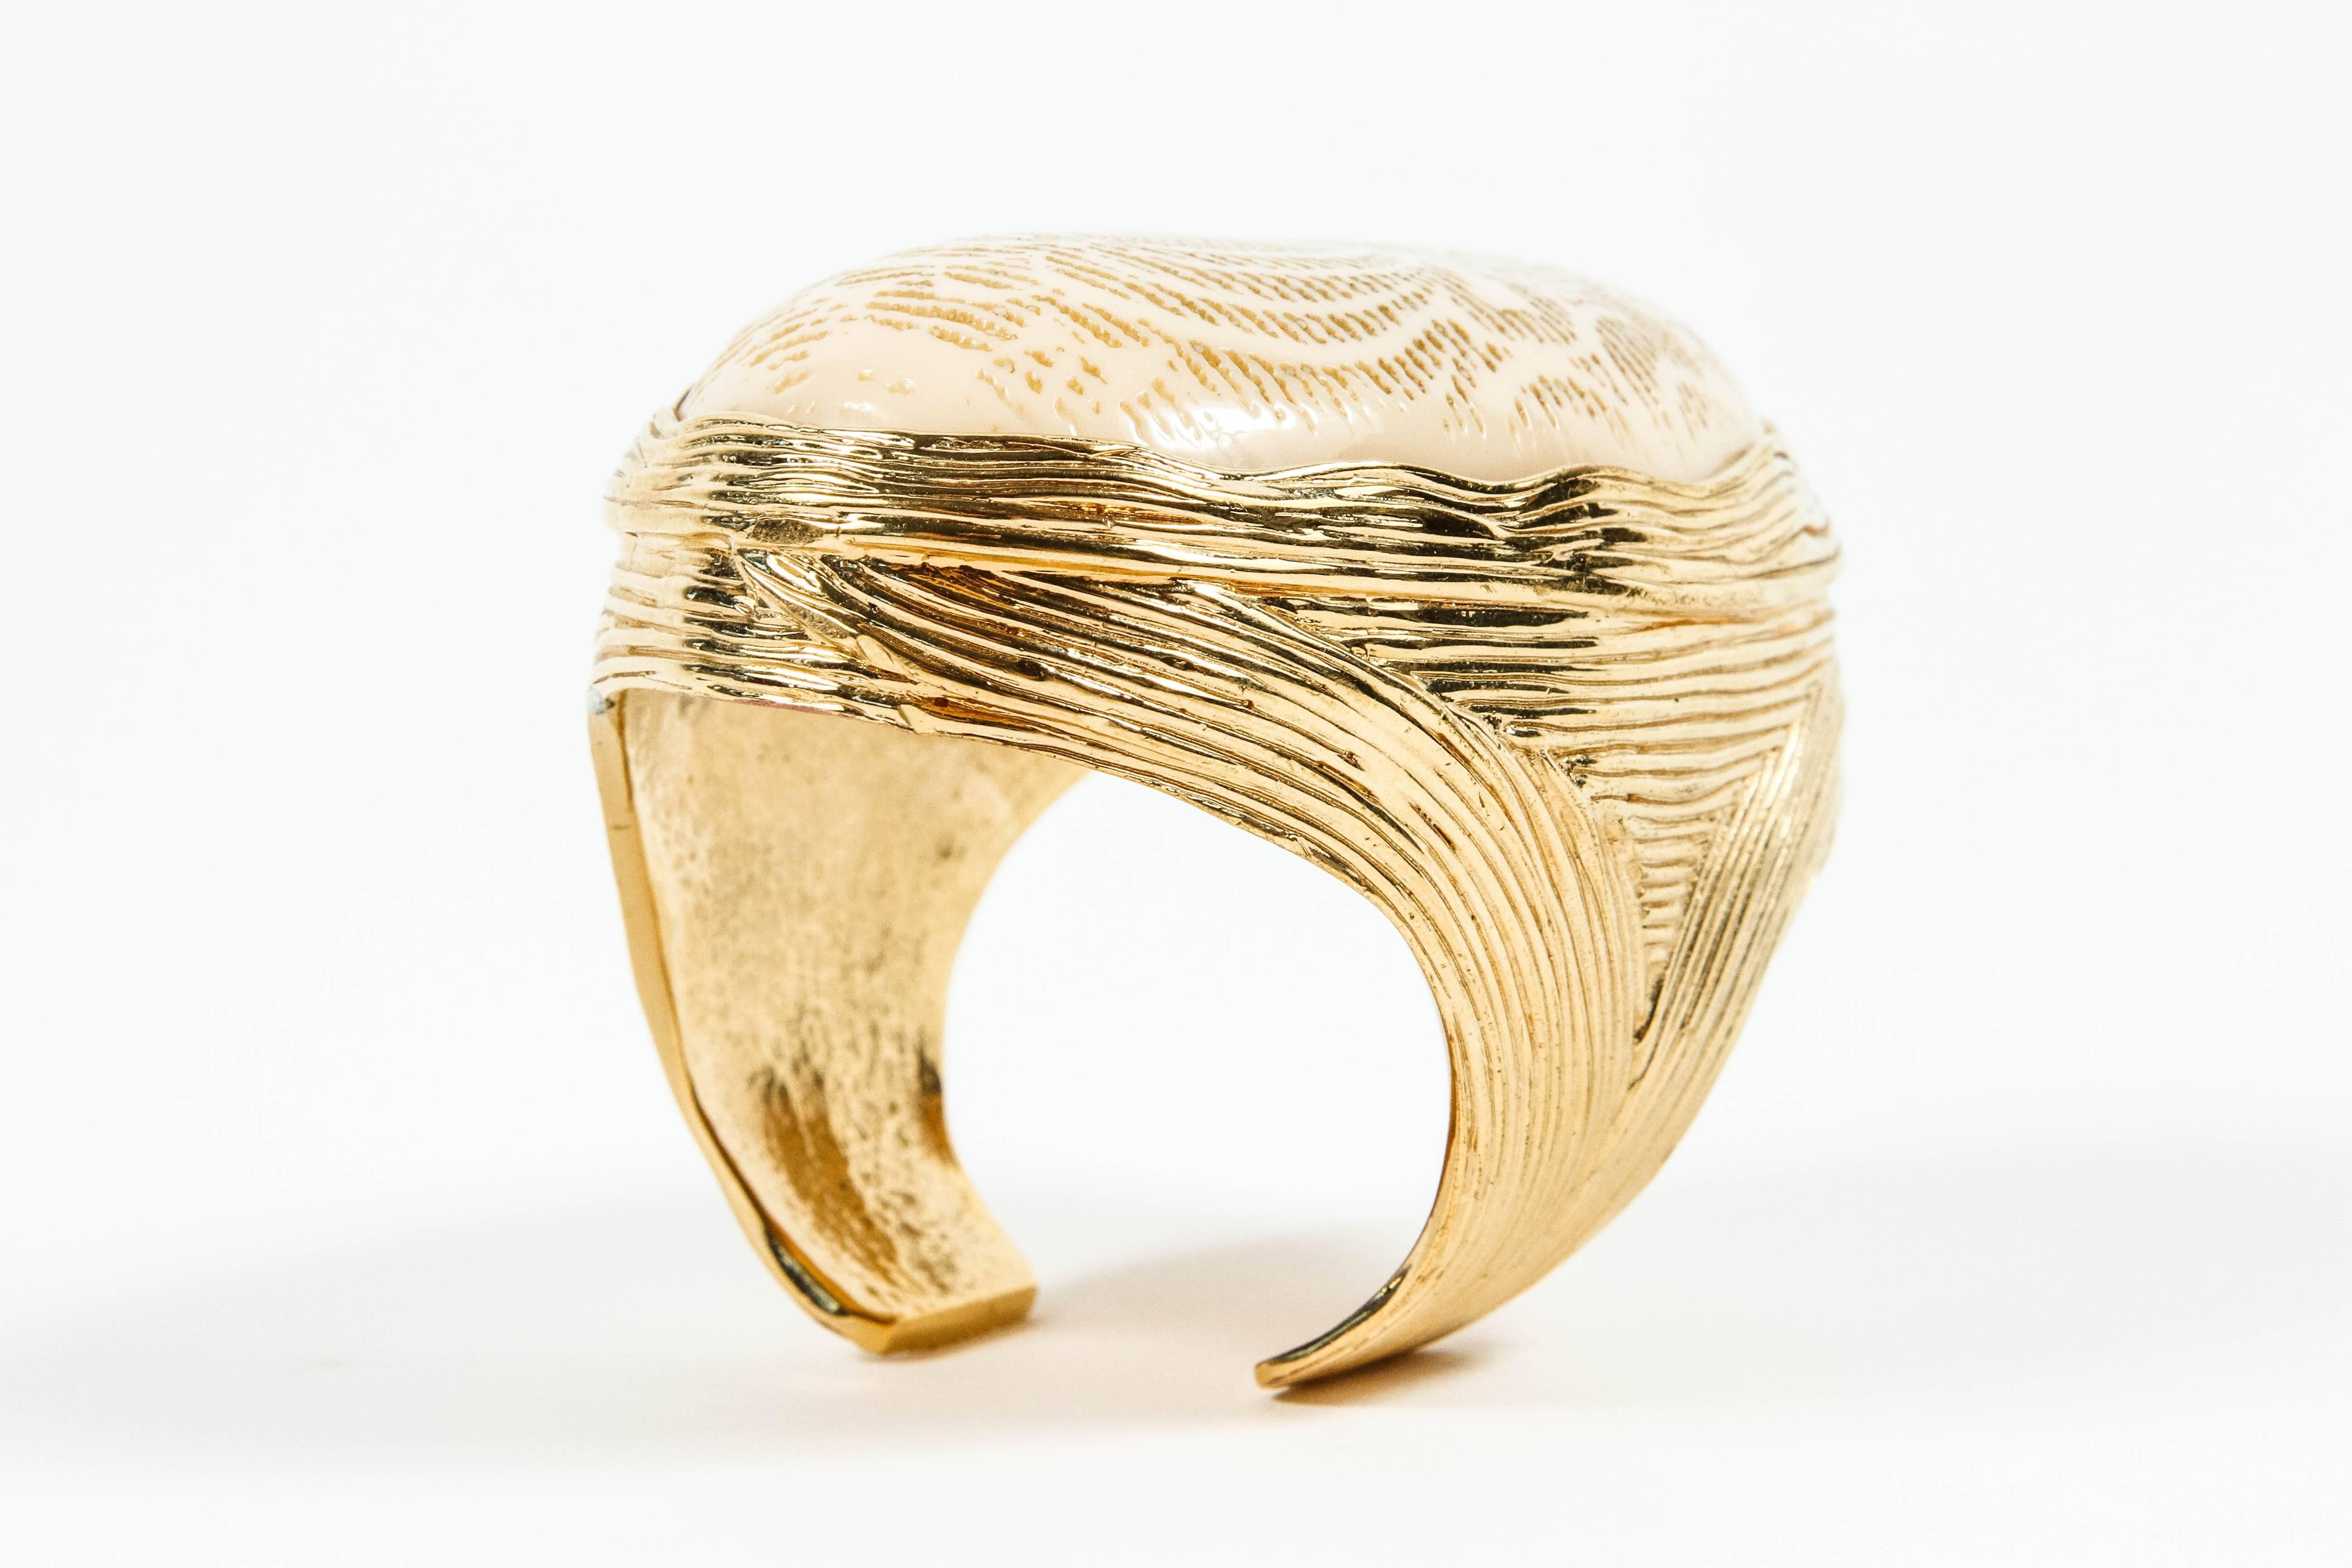 A really striking cuff featuring a faux ivory oval with a stylized scarab engraved on the surface nestled in a gilt gold setting resembling wire work.  I am not certain but this looks as though it could be the work of master jeweler Robert Goossens